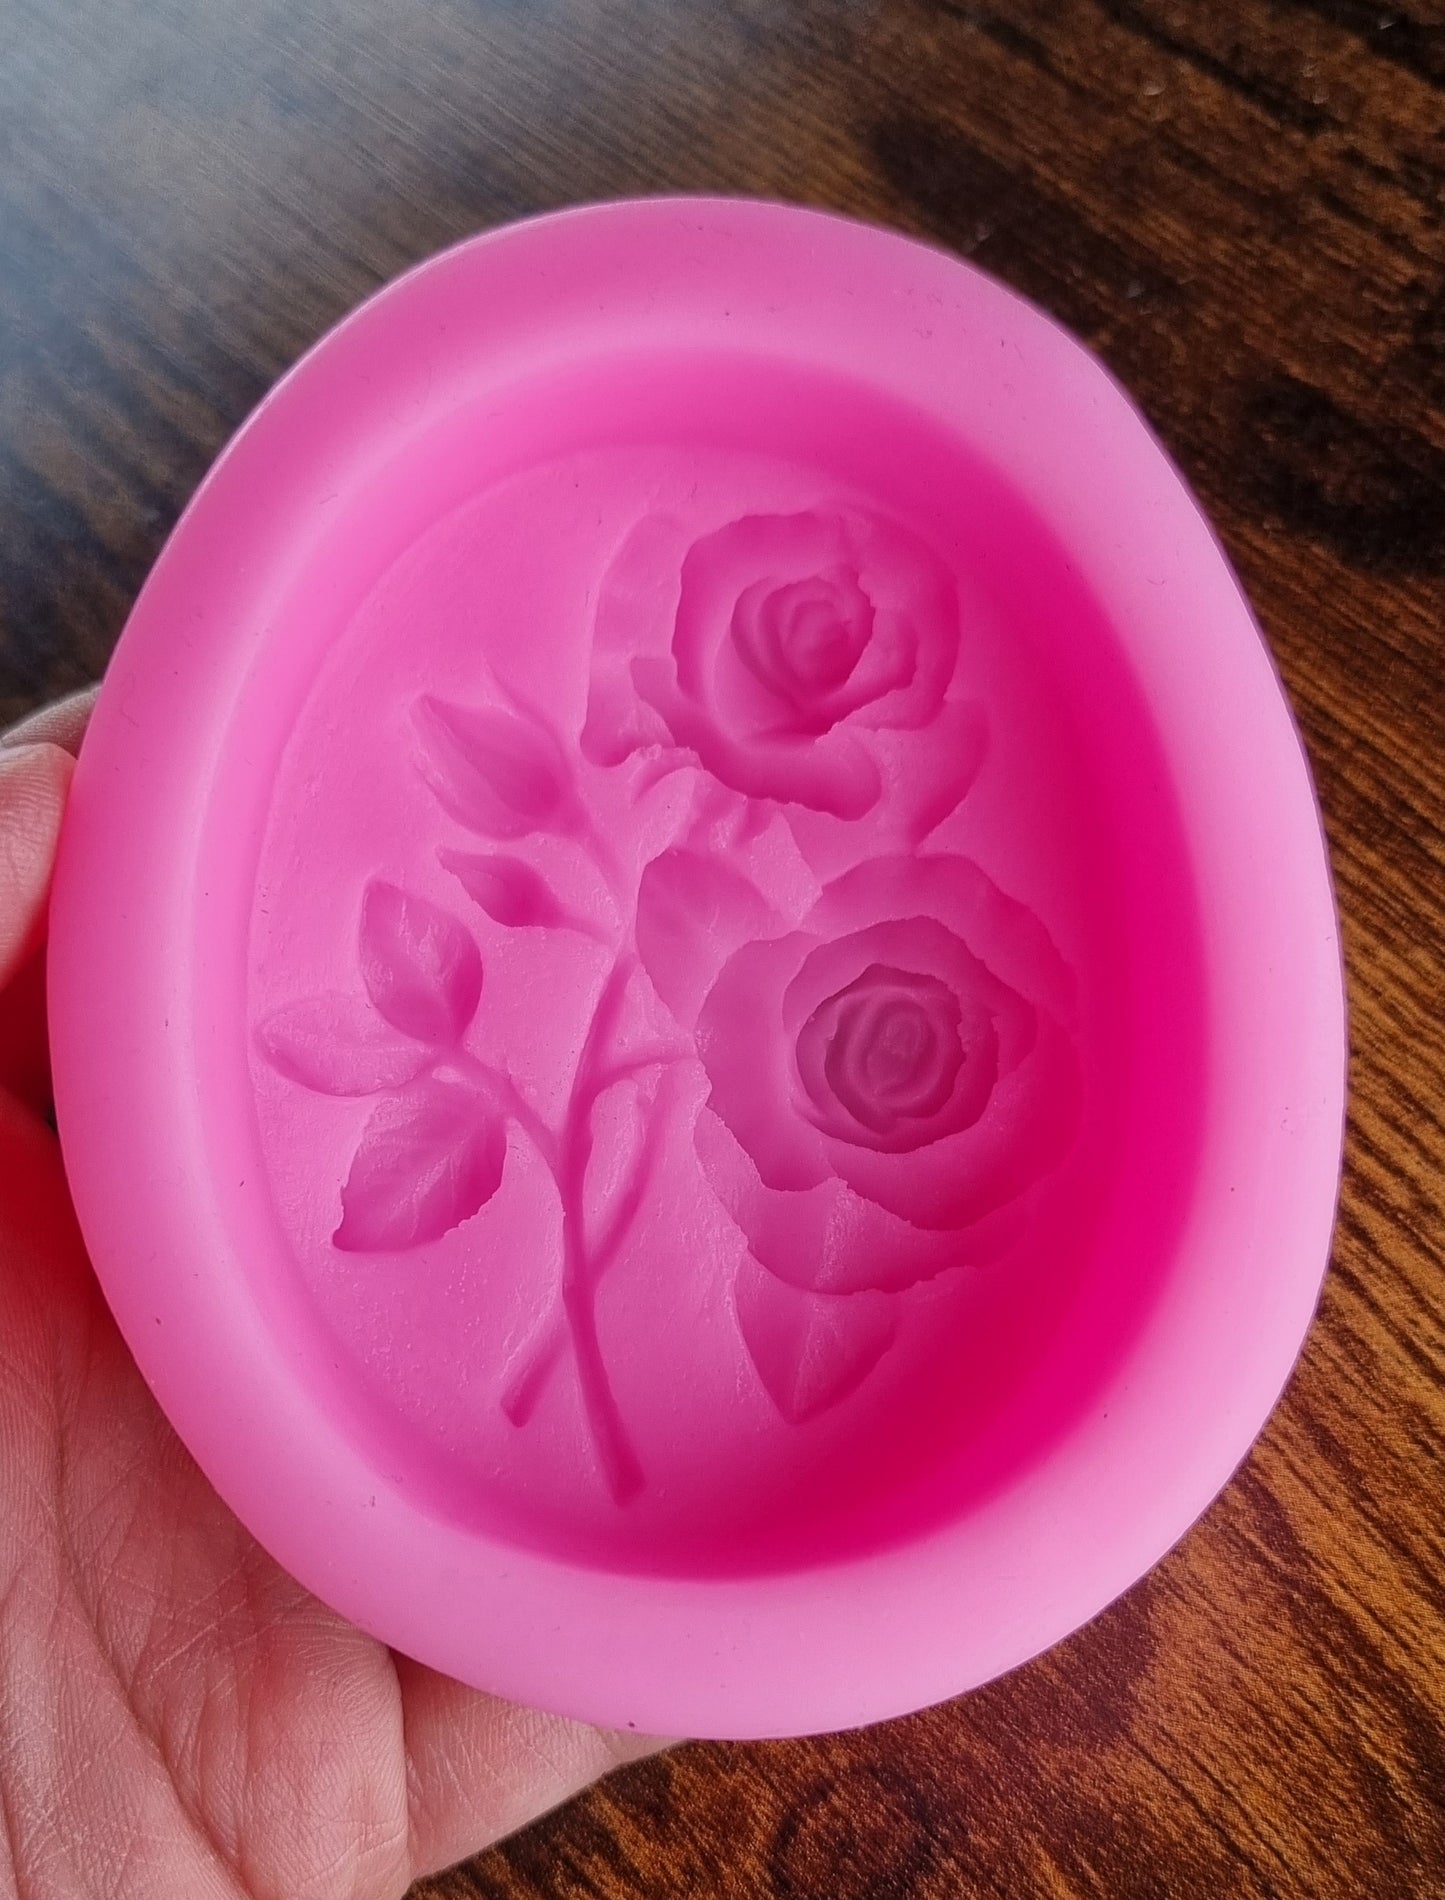 Premium Oval Rose Flower Silicone Soap Mould